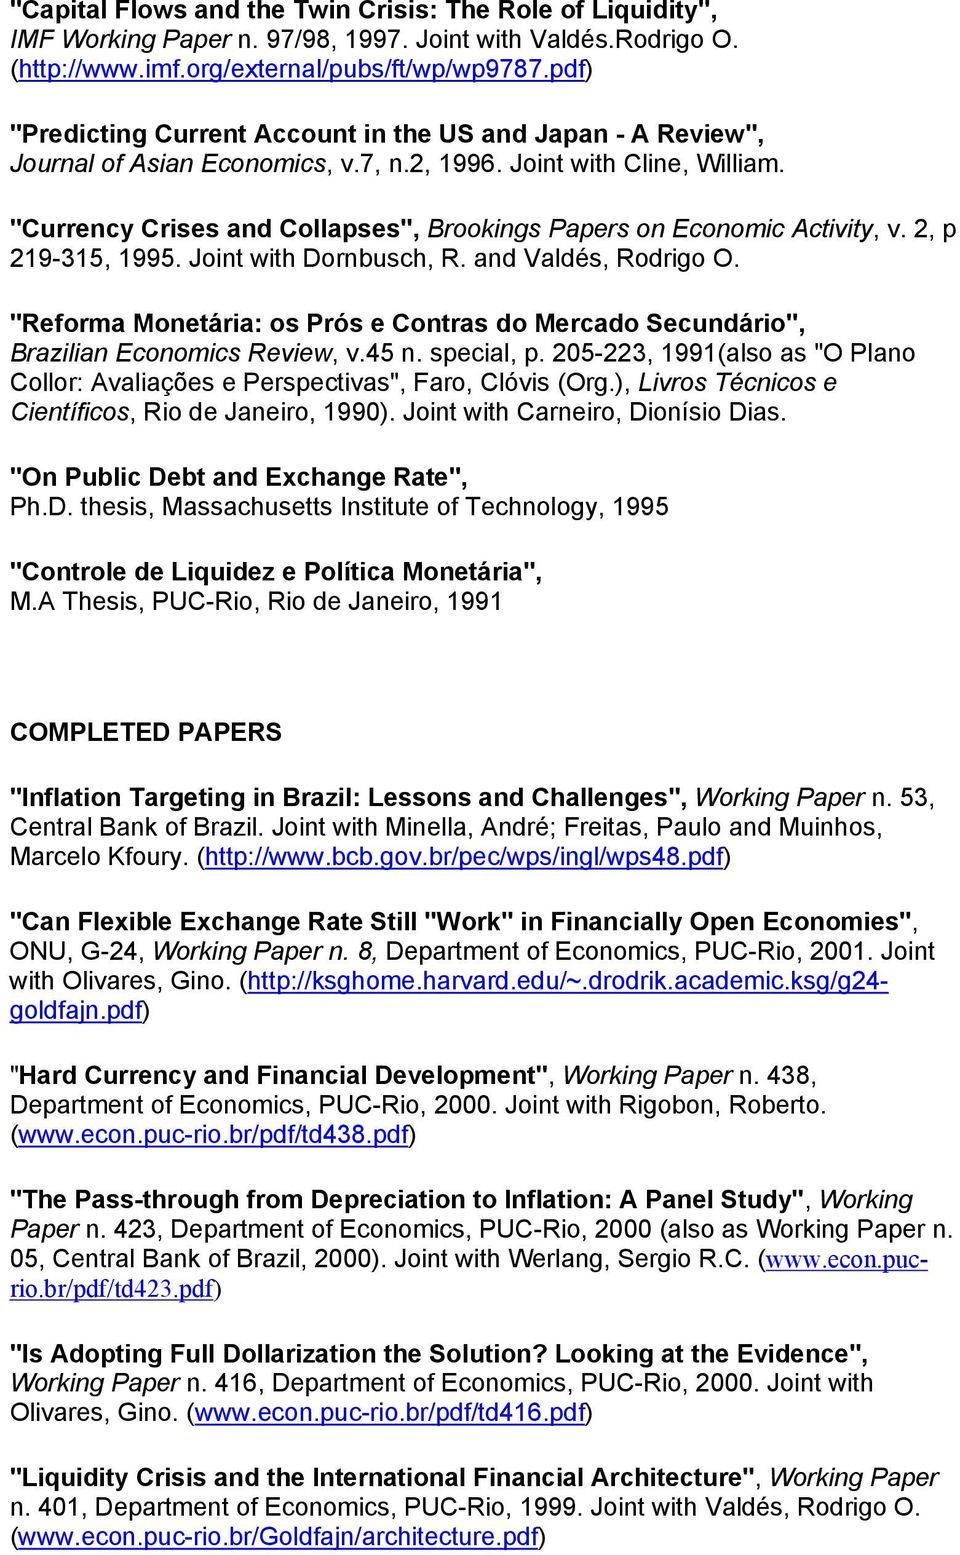 "Currency Crises and Collapses", Brookings Papers on Economic Activity, v. 2, p 219-315, 1995. Joint with Dornbusch, R. and Valdés, Rodrigo O.